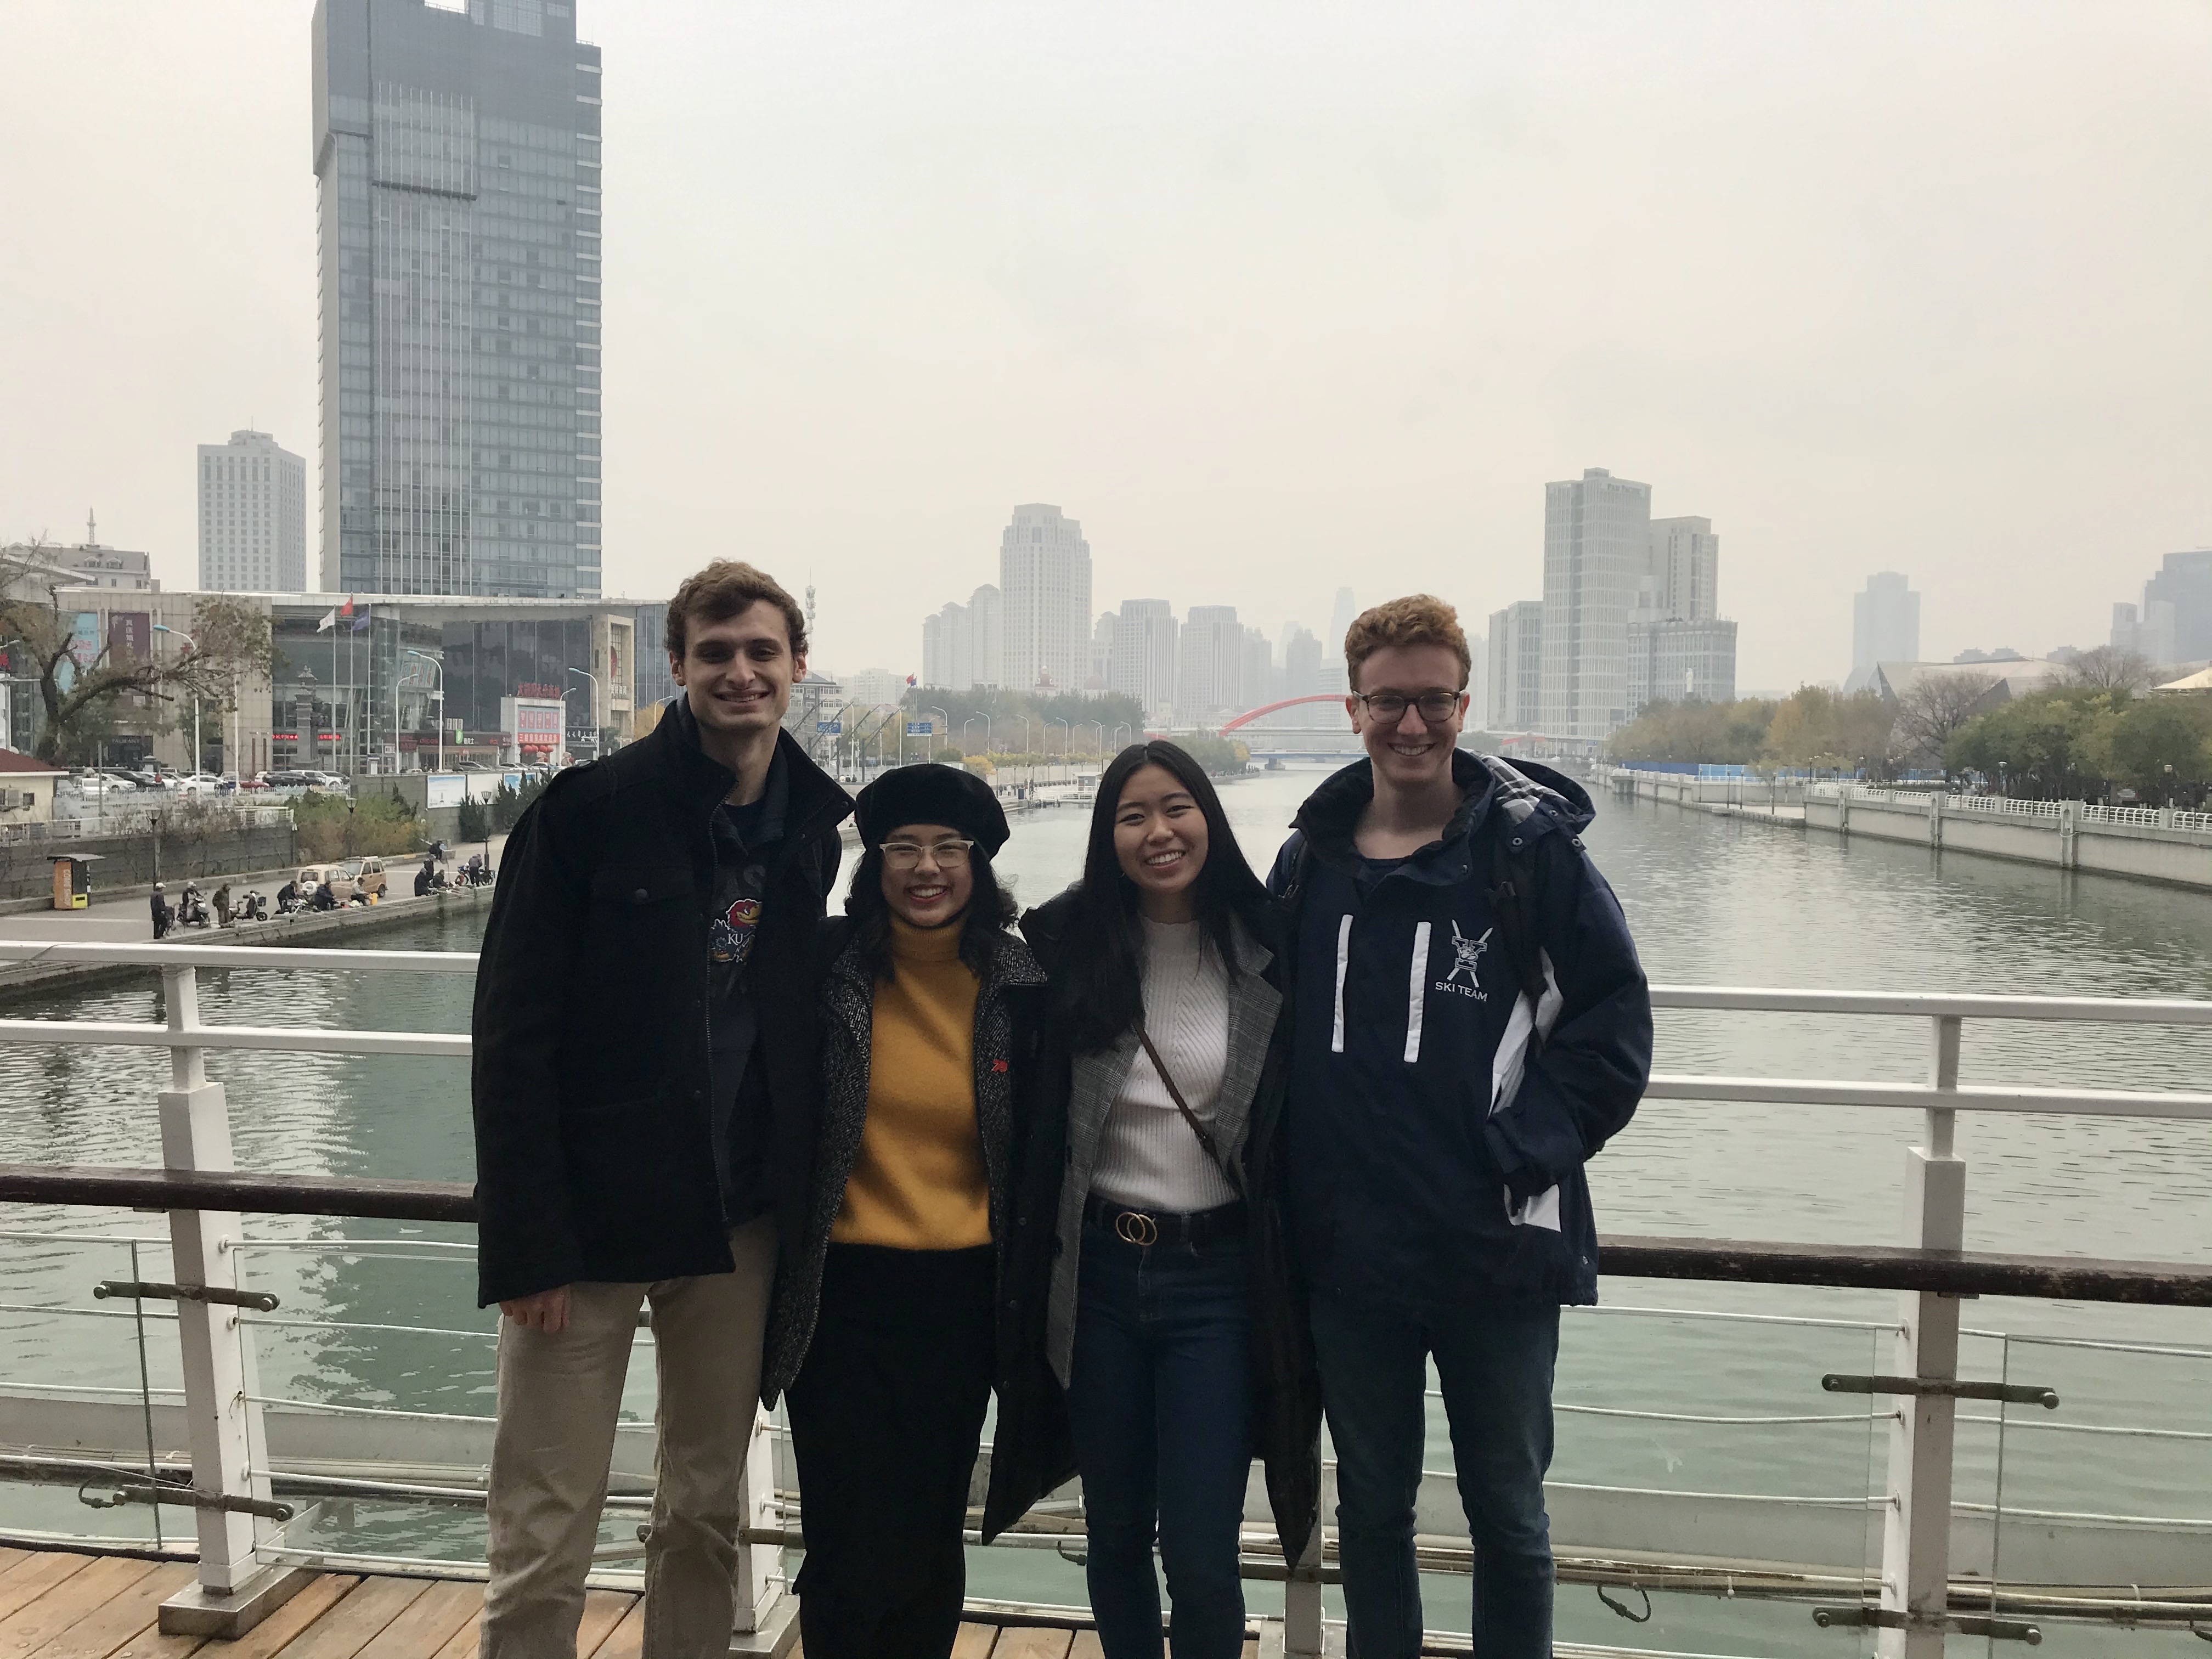 Group photo on bridge overlooking river and skyline in Tianjin